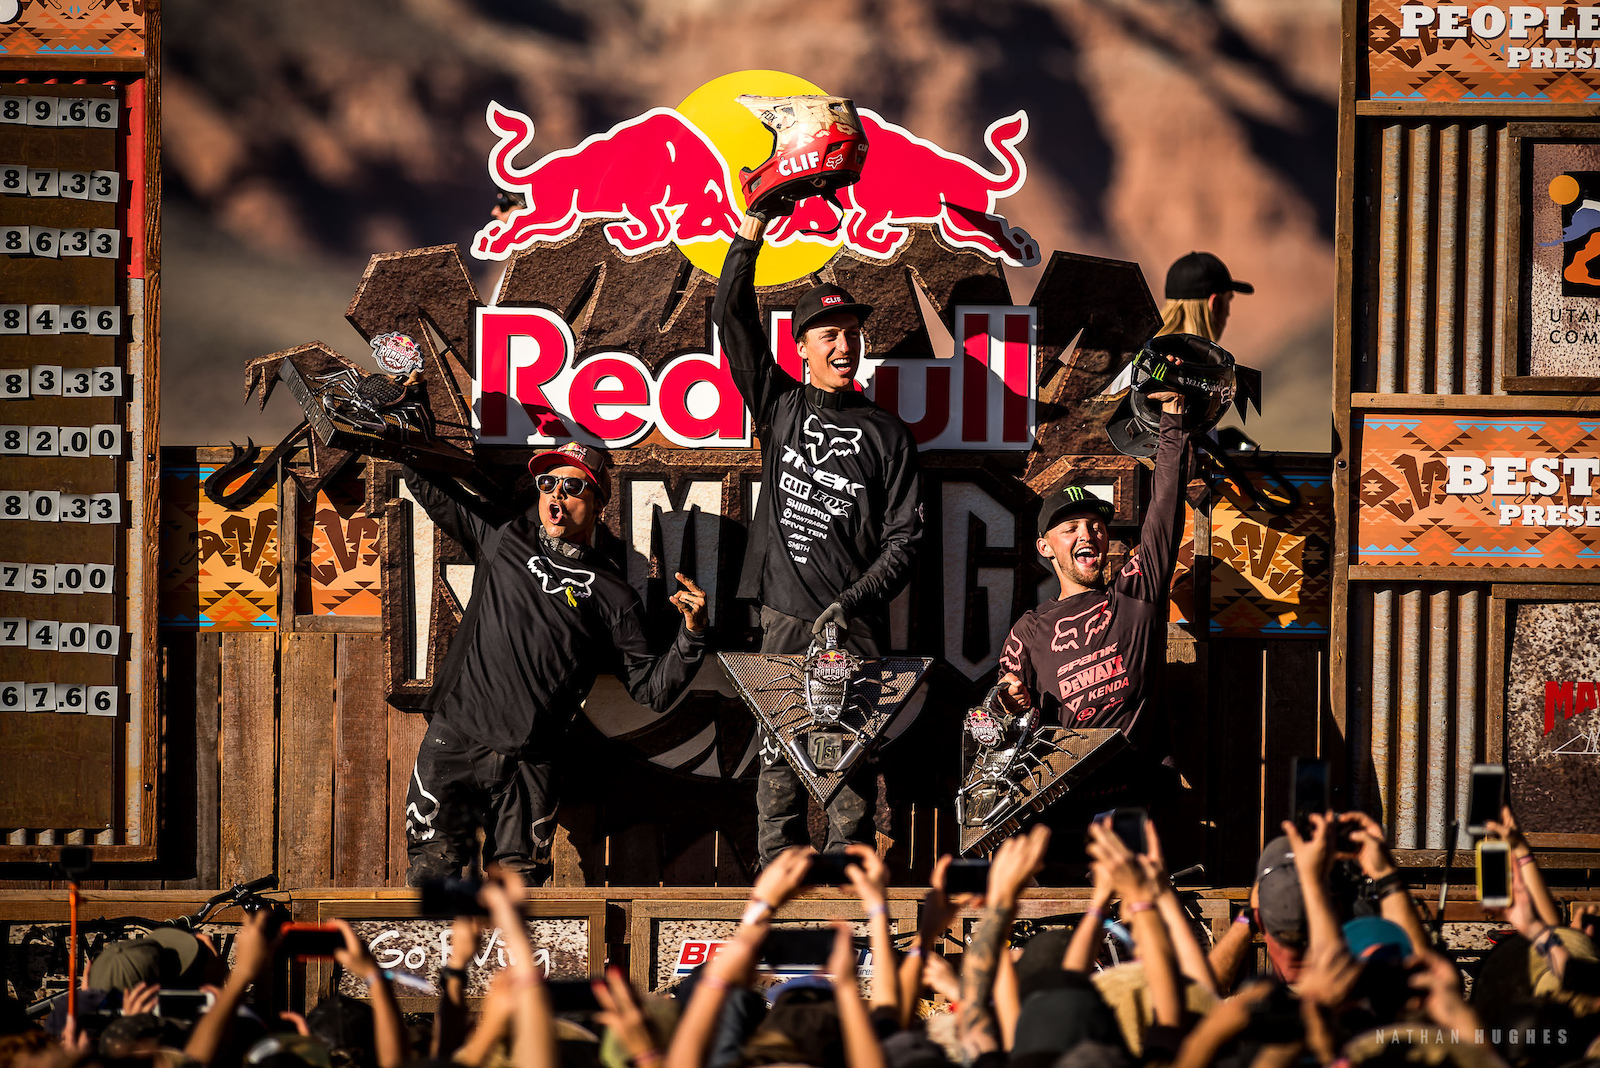 A full Fox podium of Rheeder Lacondeguy and Nell doing the business here at the 13th Rampage.